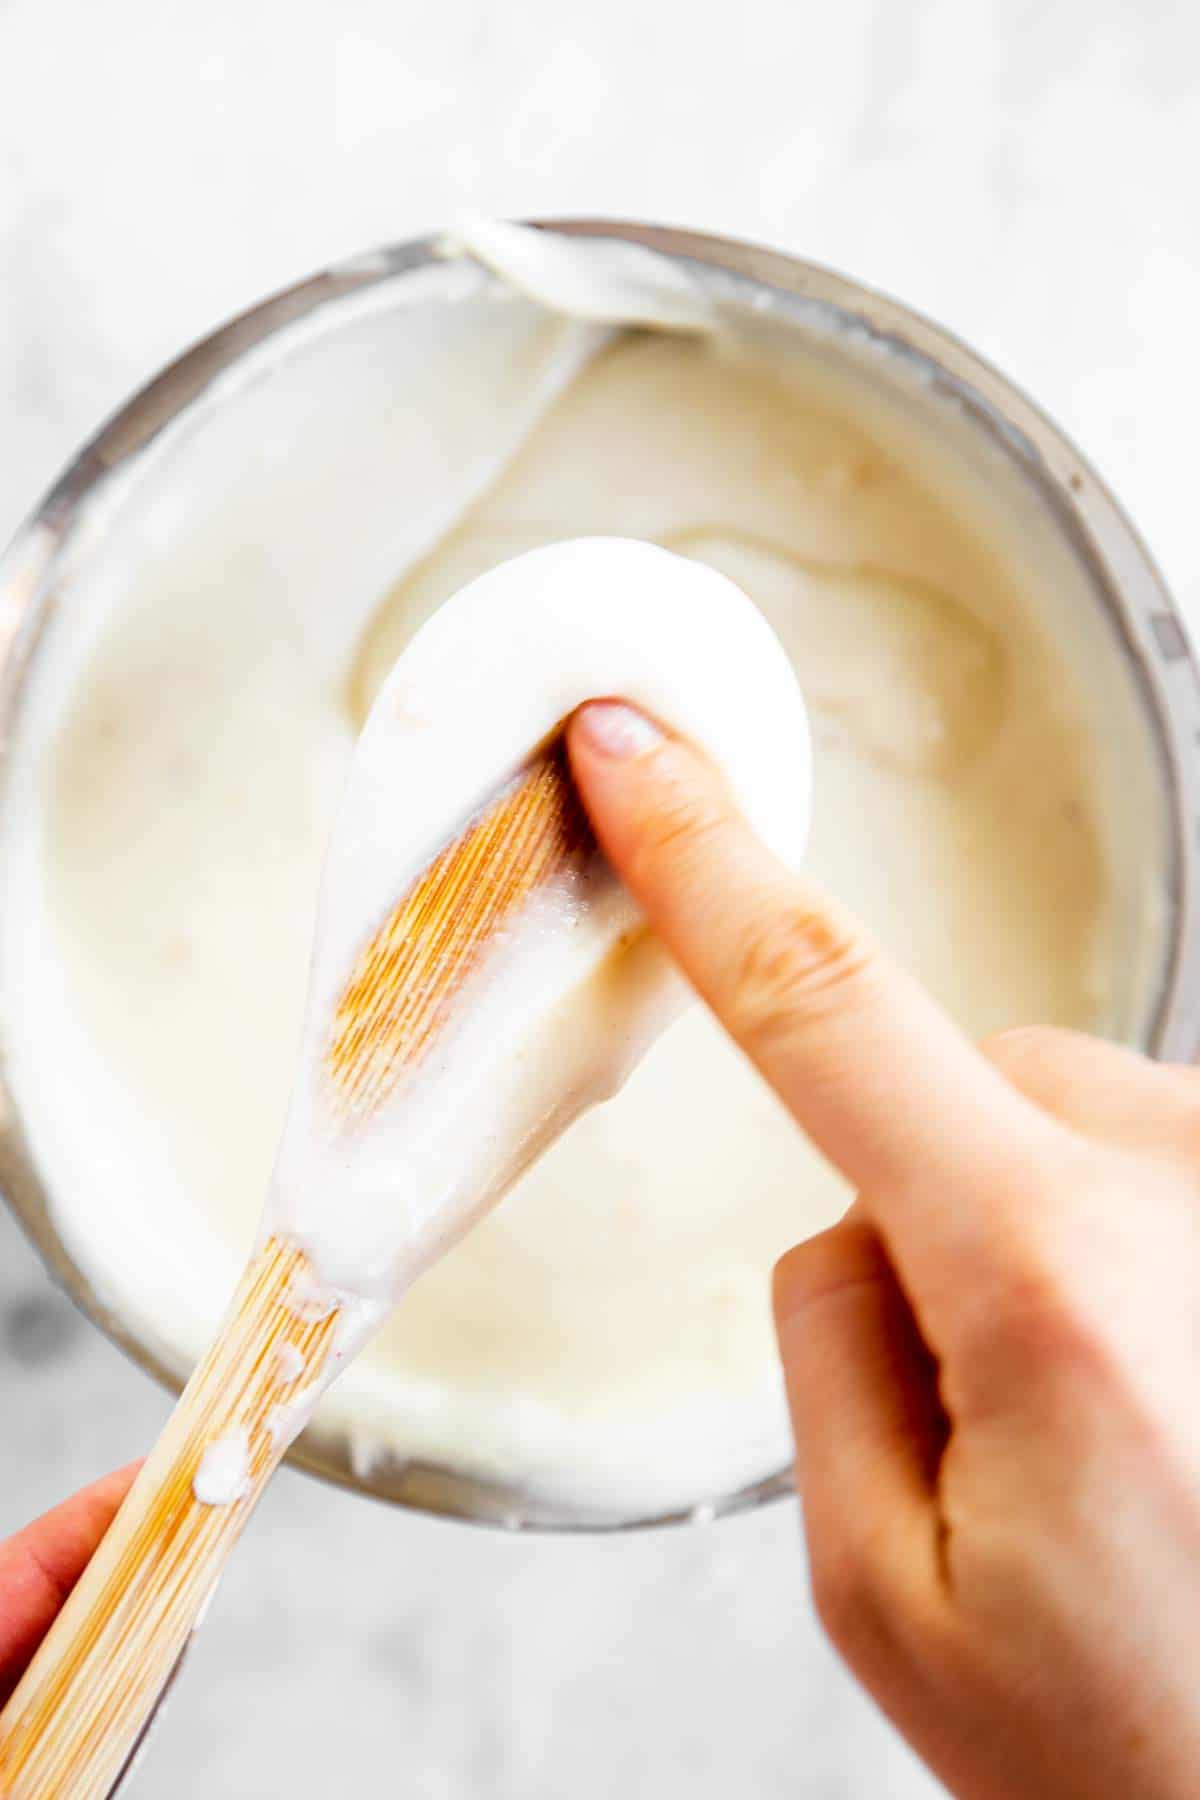 female hand stroking through Béchamel sauce coating back of a wooden spoon